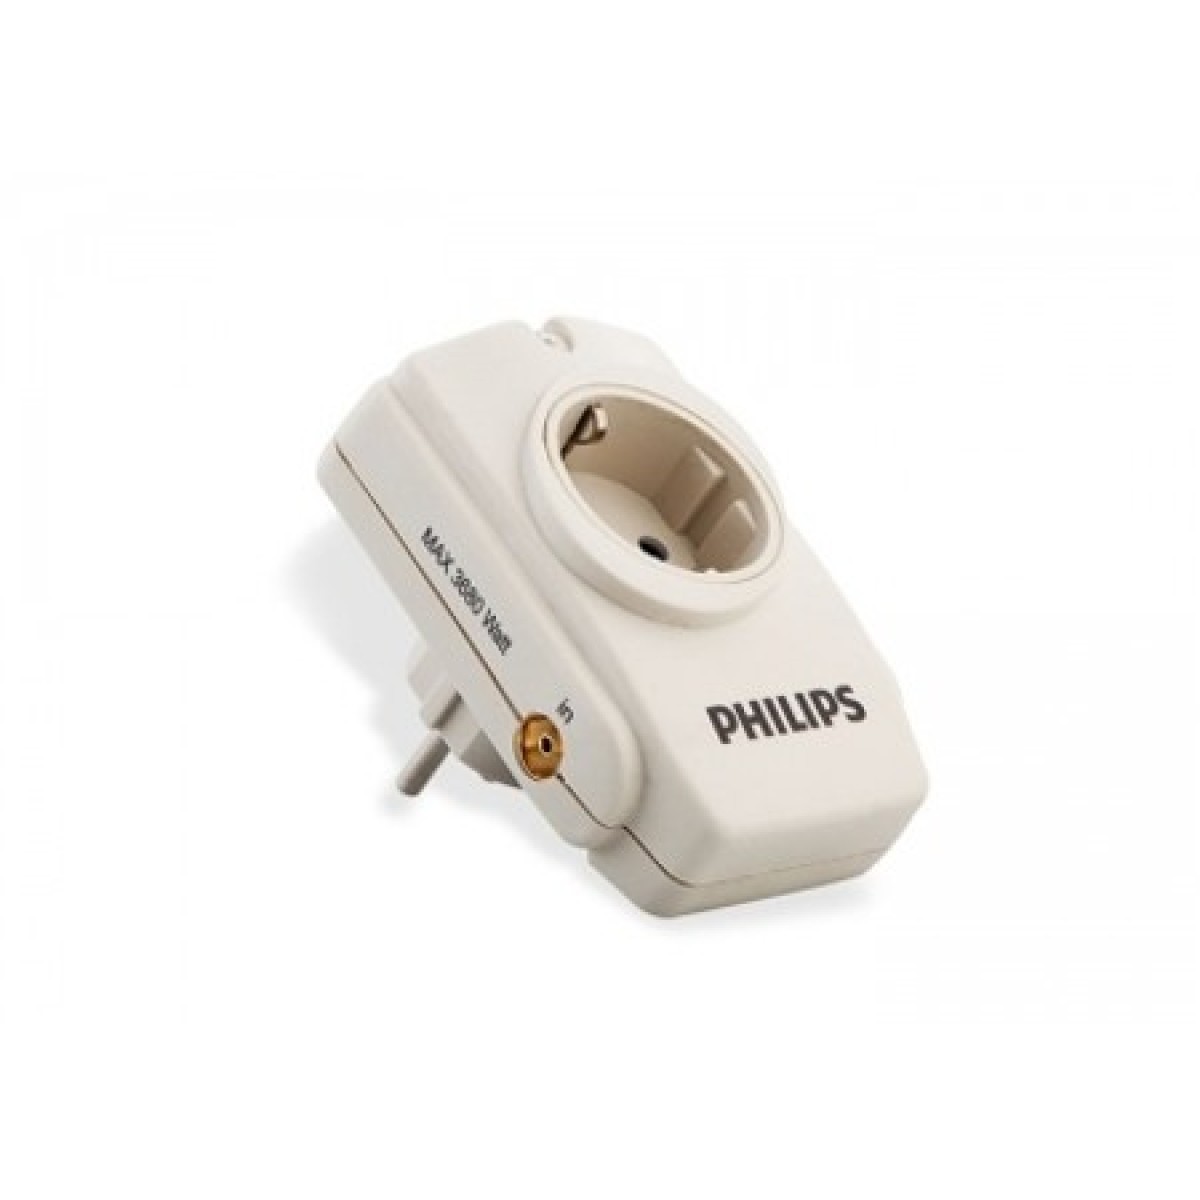 PHILIPS SPN 3110 CURRENT PROTECTION